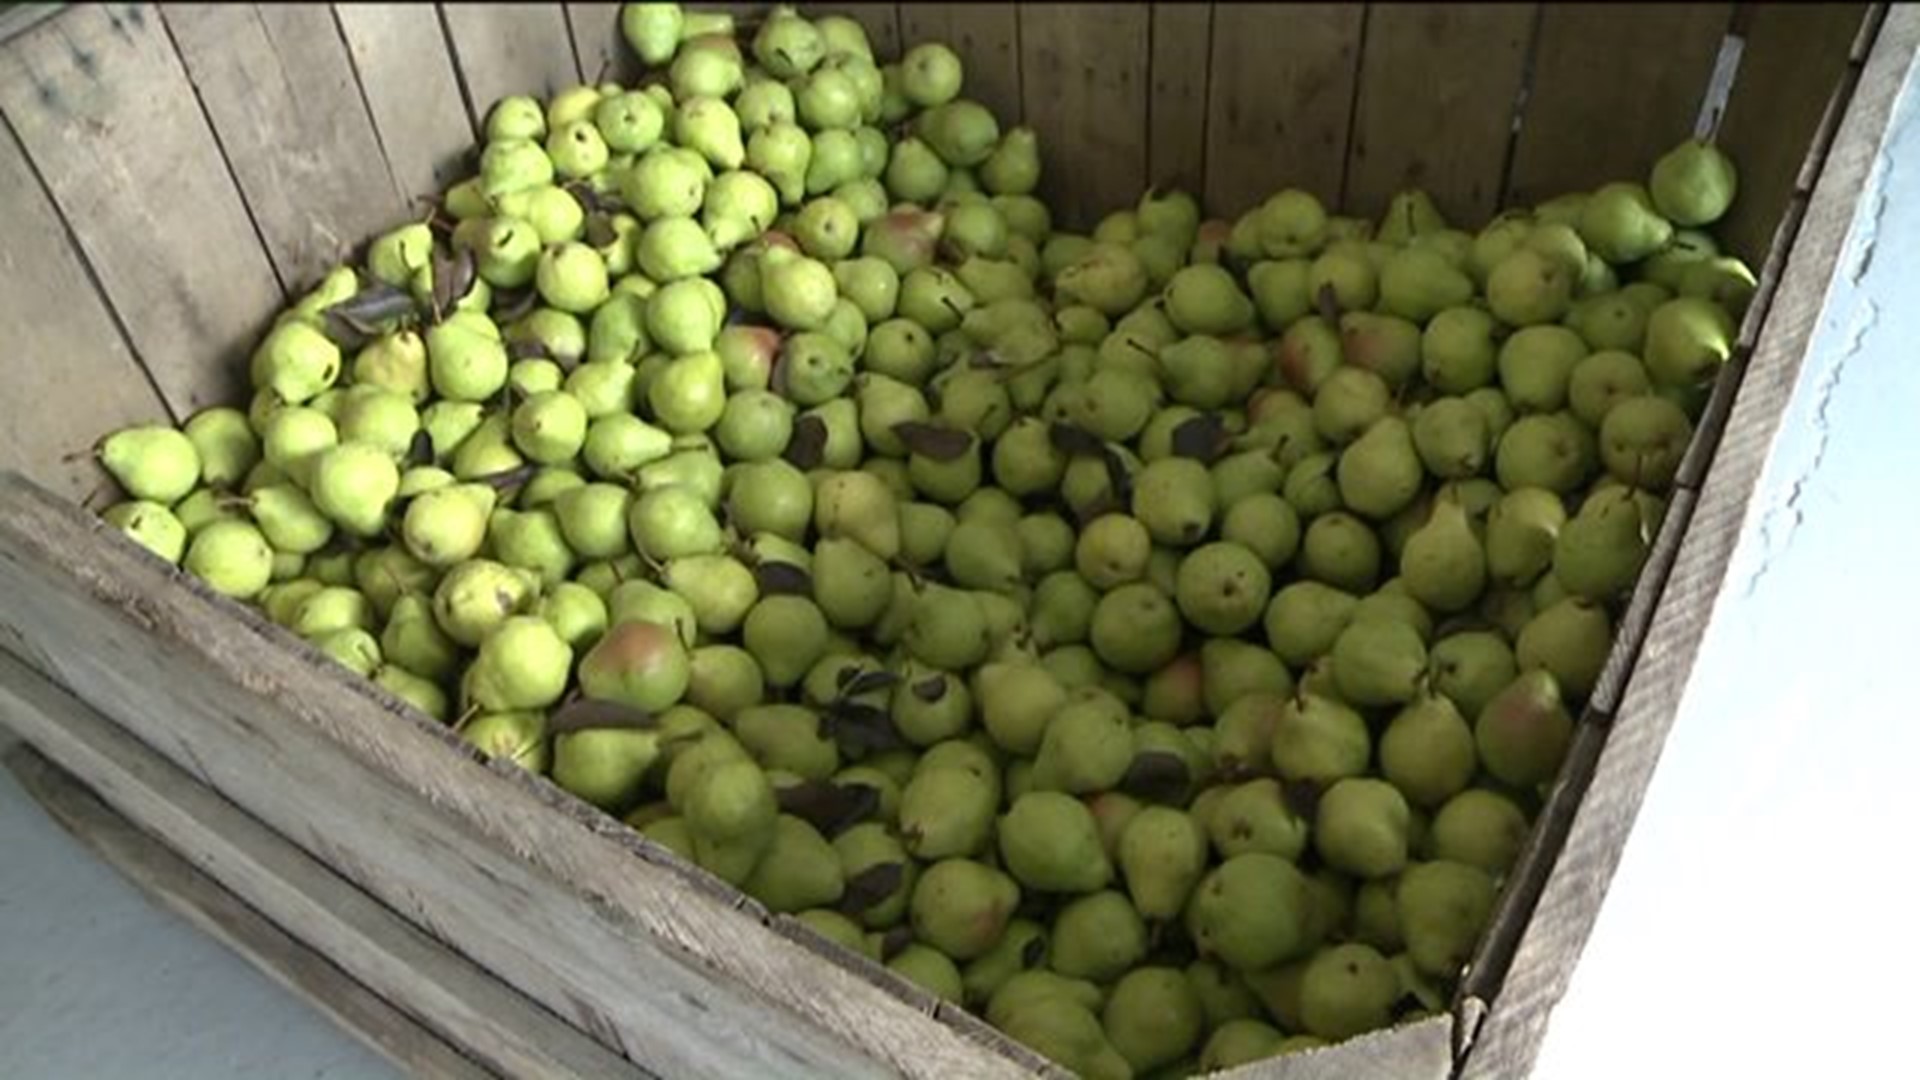 Pear Cider Sells Out at Ritter's Cider Mill